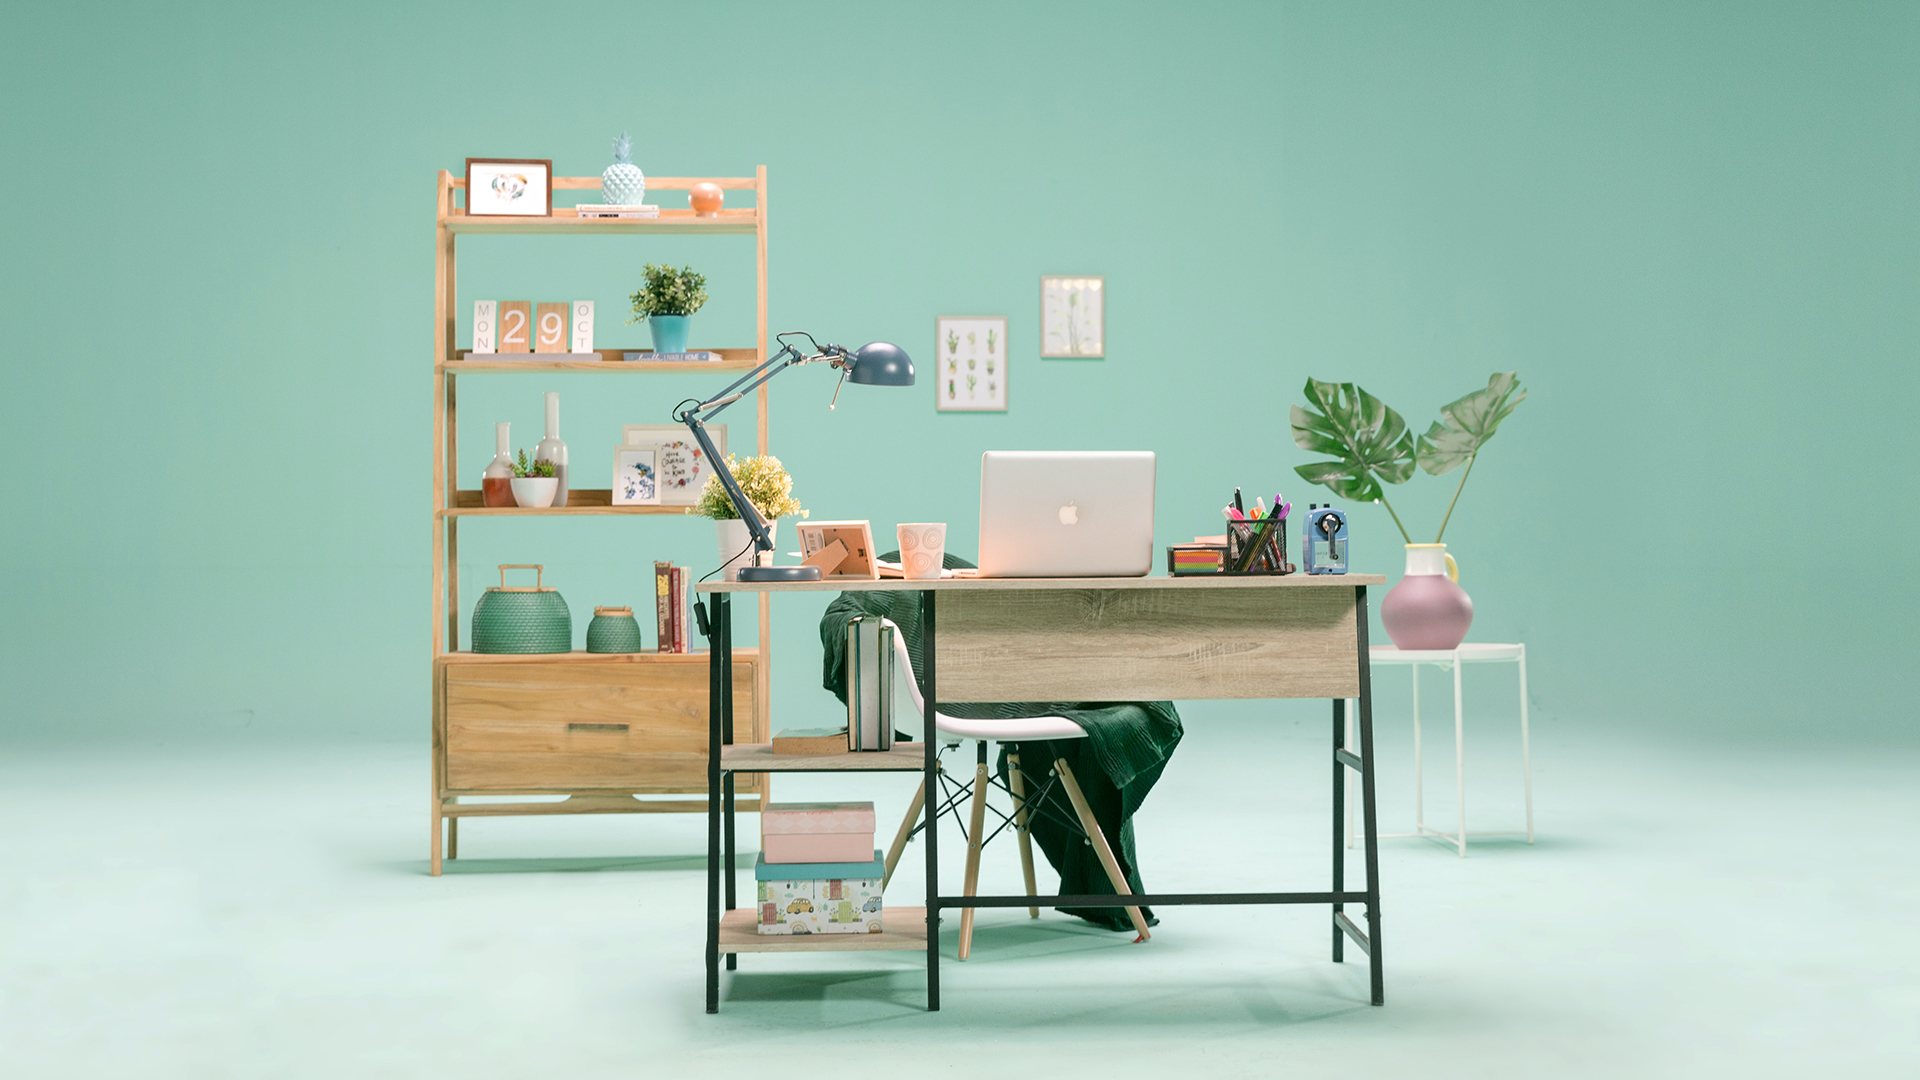 A mint green room decorated with a desk and shelves. A laptop sits on the desk.